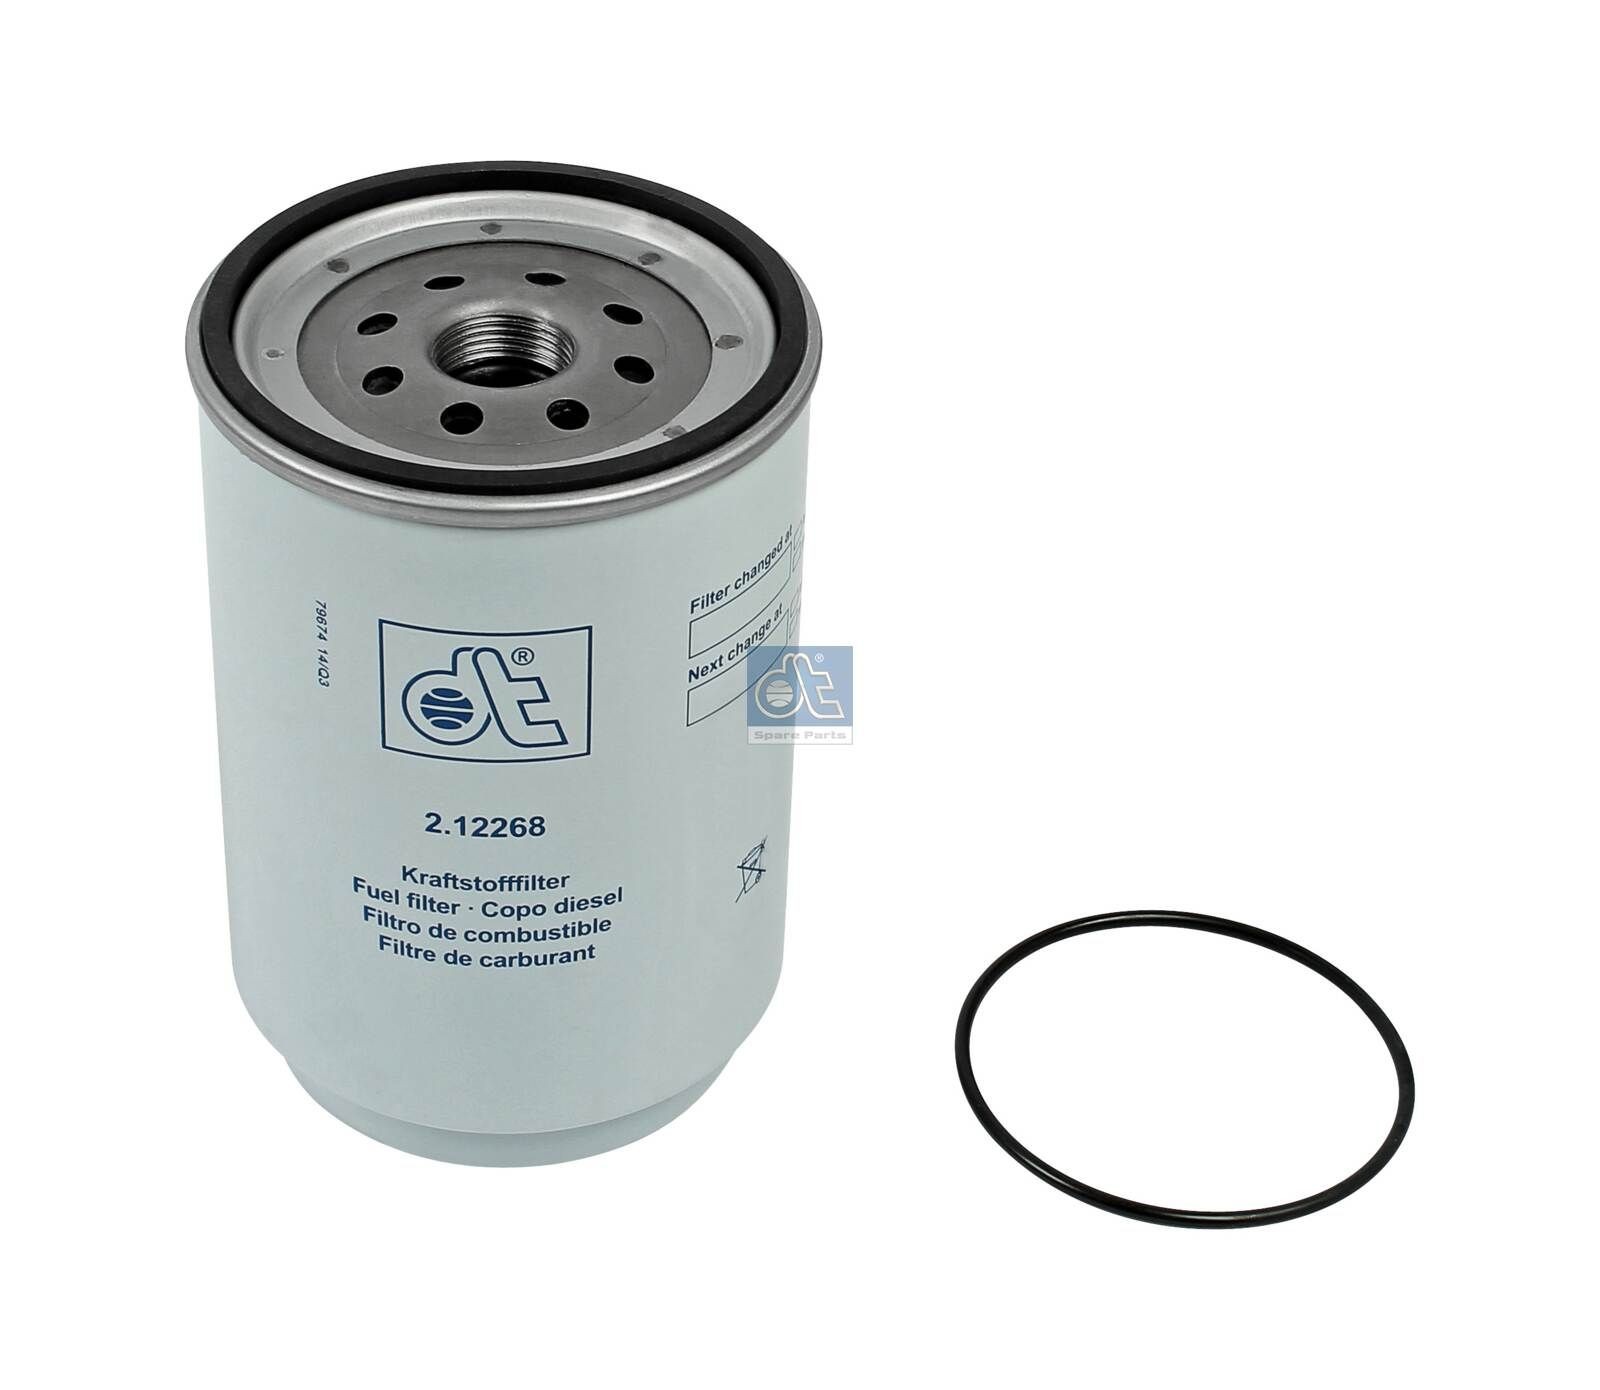 WK 11 001 x DT Spare Parts 2.12268 Fuel filter 21366596